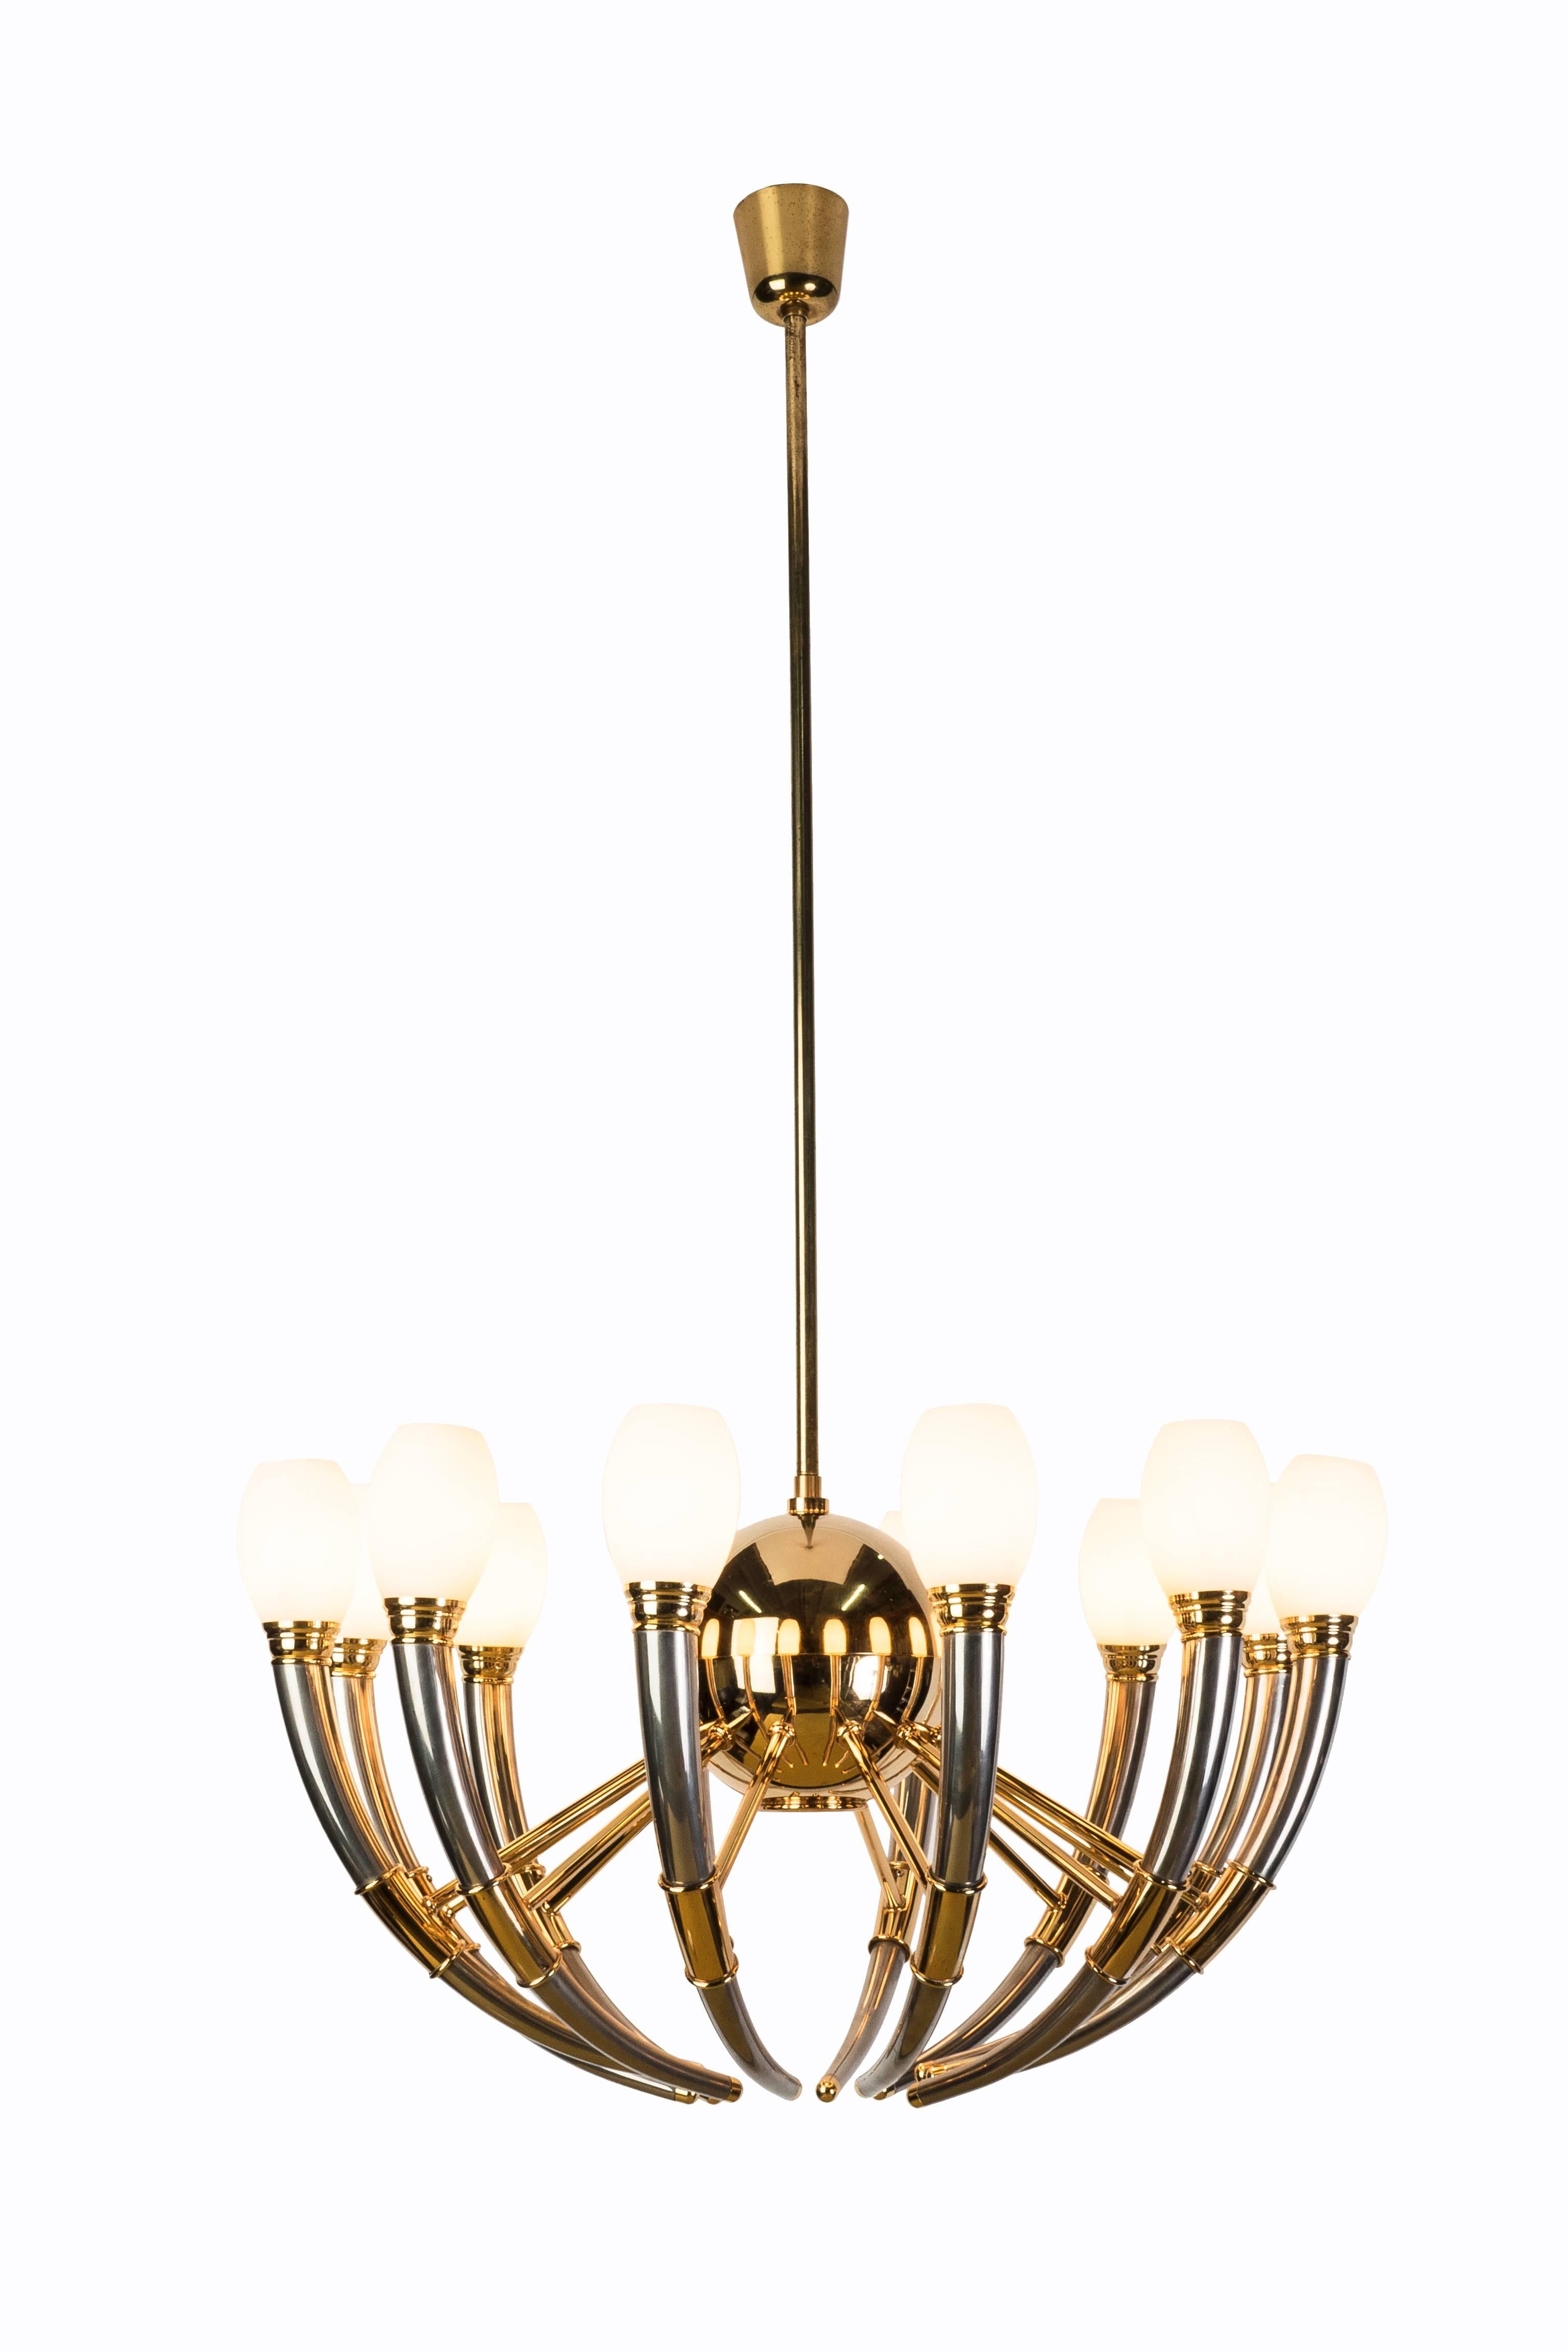 This gorgeous thirteen-light silver, gold and opal glass Regency chandelier is in excellent, original condition, featuring double-layered handblown opal glass shades and a brilliant brass and chrome frame. The chandelier has been newly rewired.